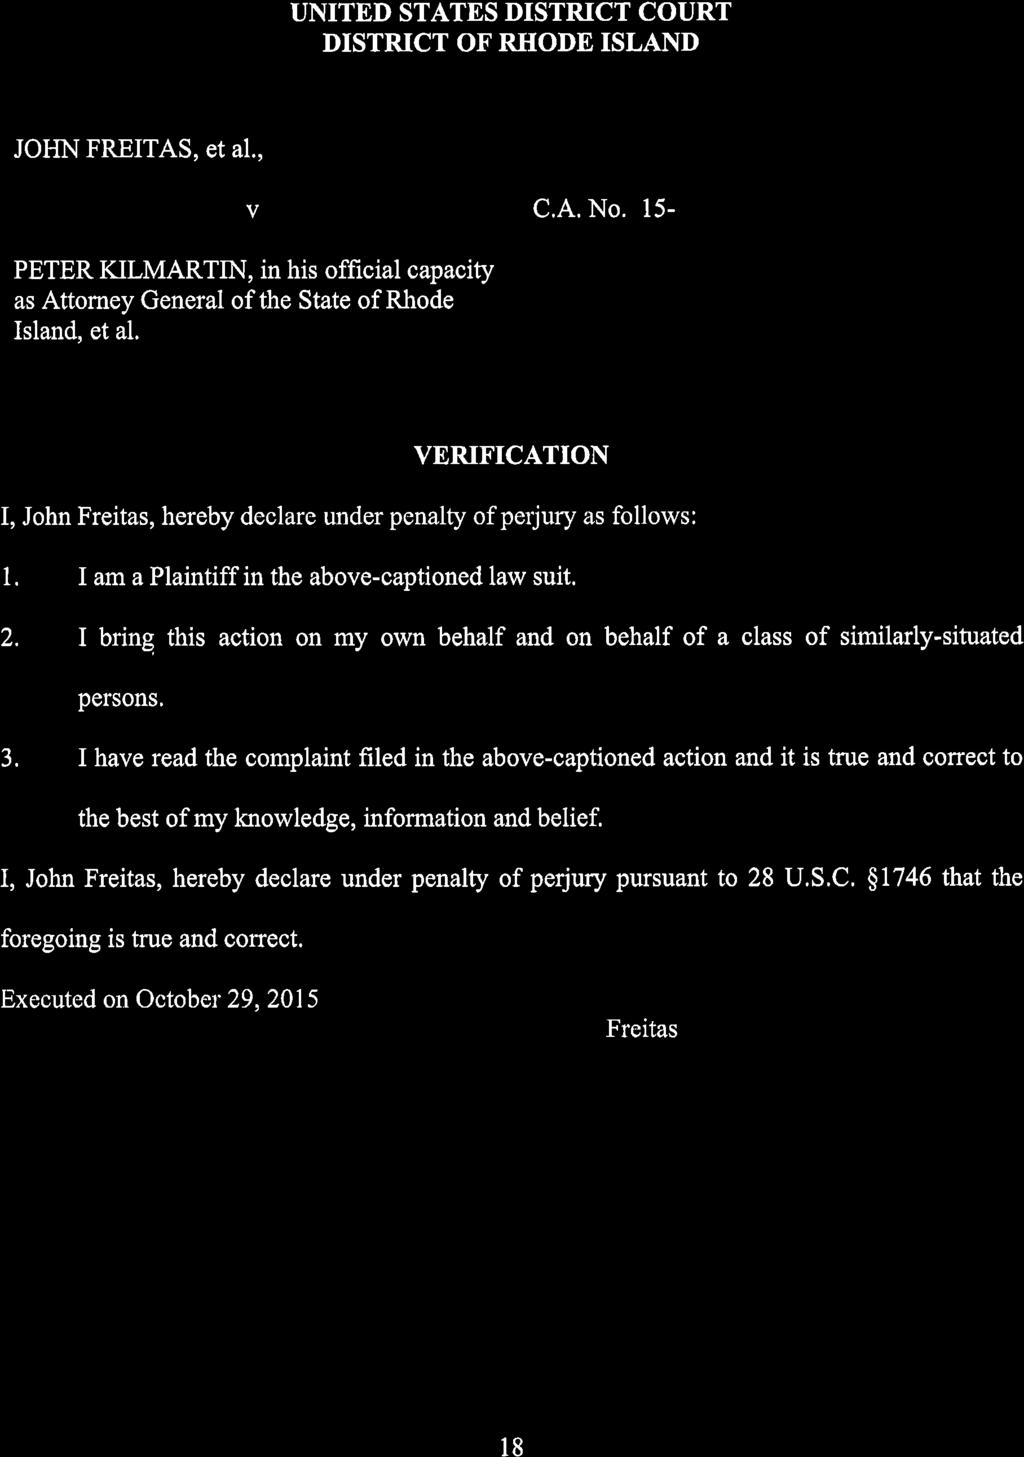 UNITED STATES DISTRICT COURT DISTRICT OF RIIODE ISLAND JOHN FREITAS, et al., v C.A. No. 15' PETER KILMARTIN, in his official capacity as Attorney General of the State of Rhode Island, et al.